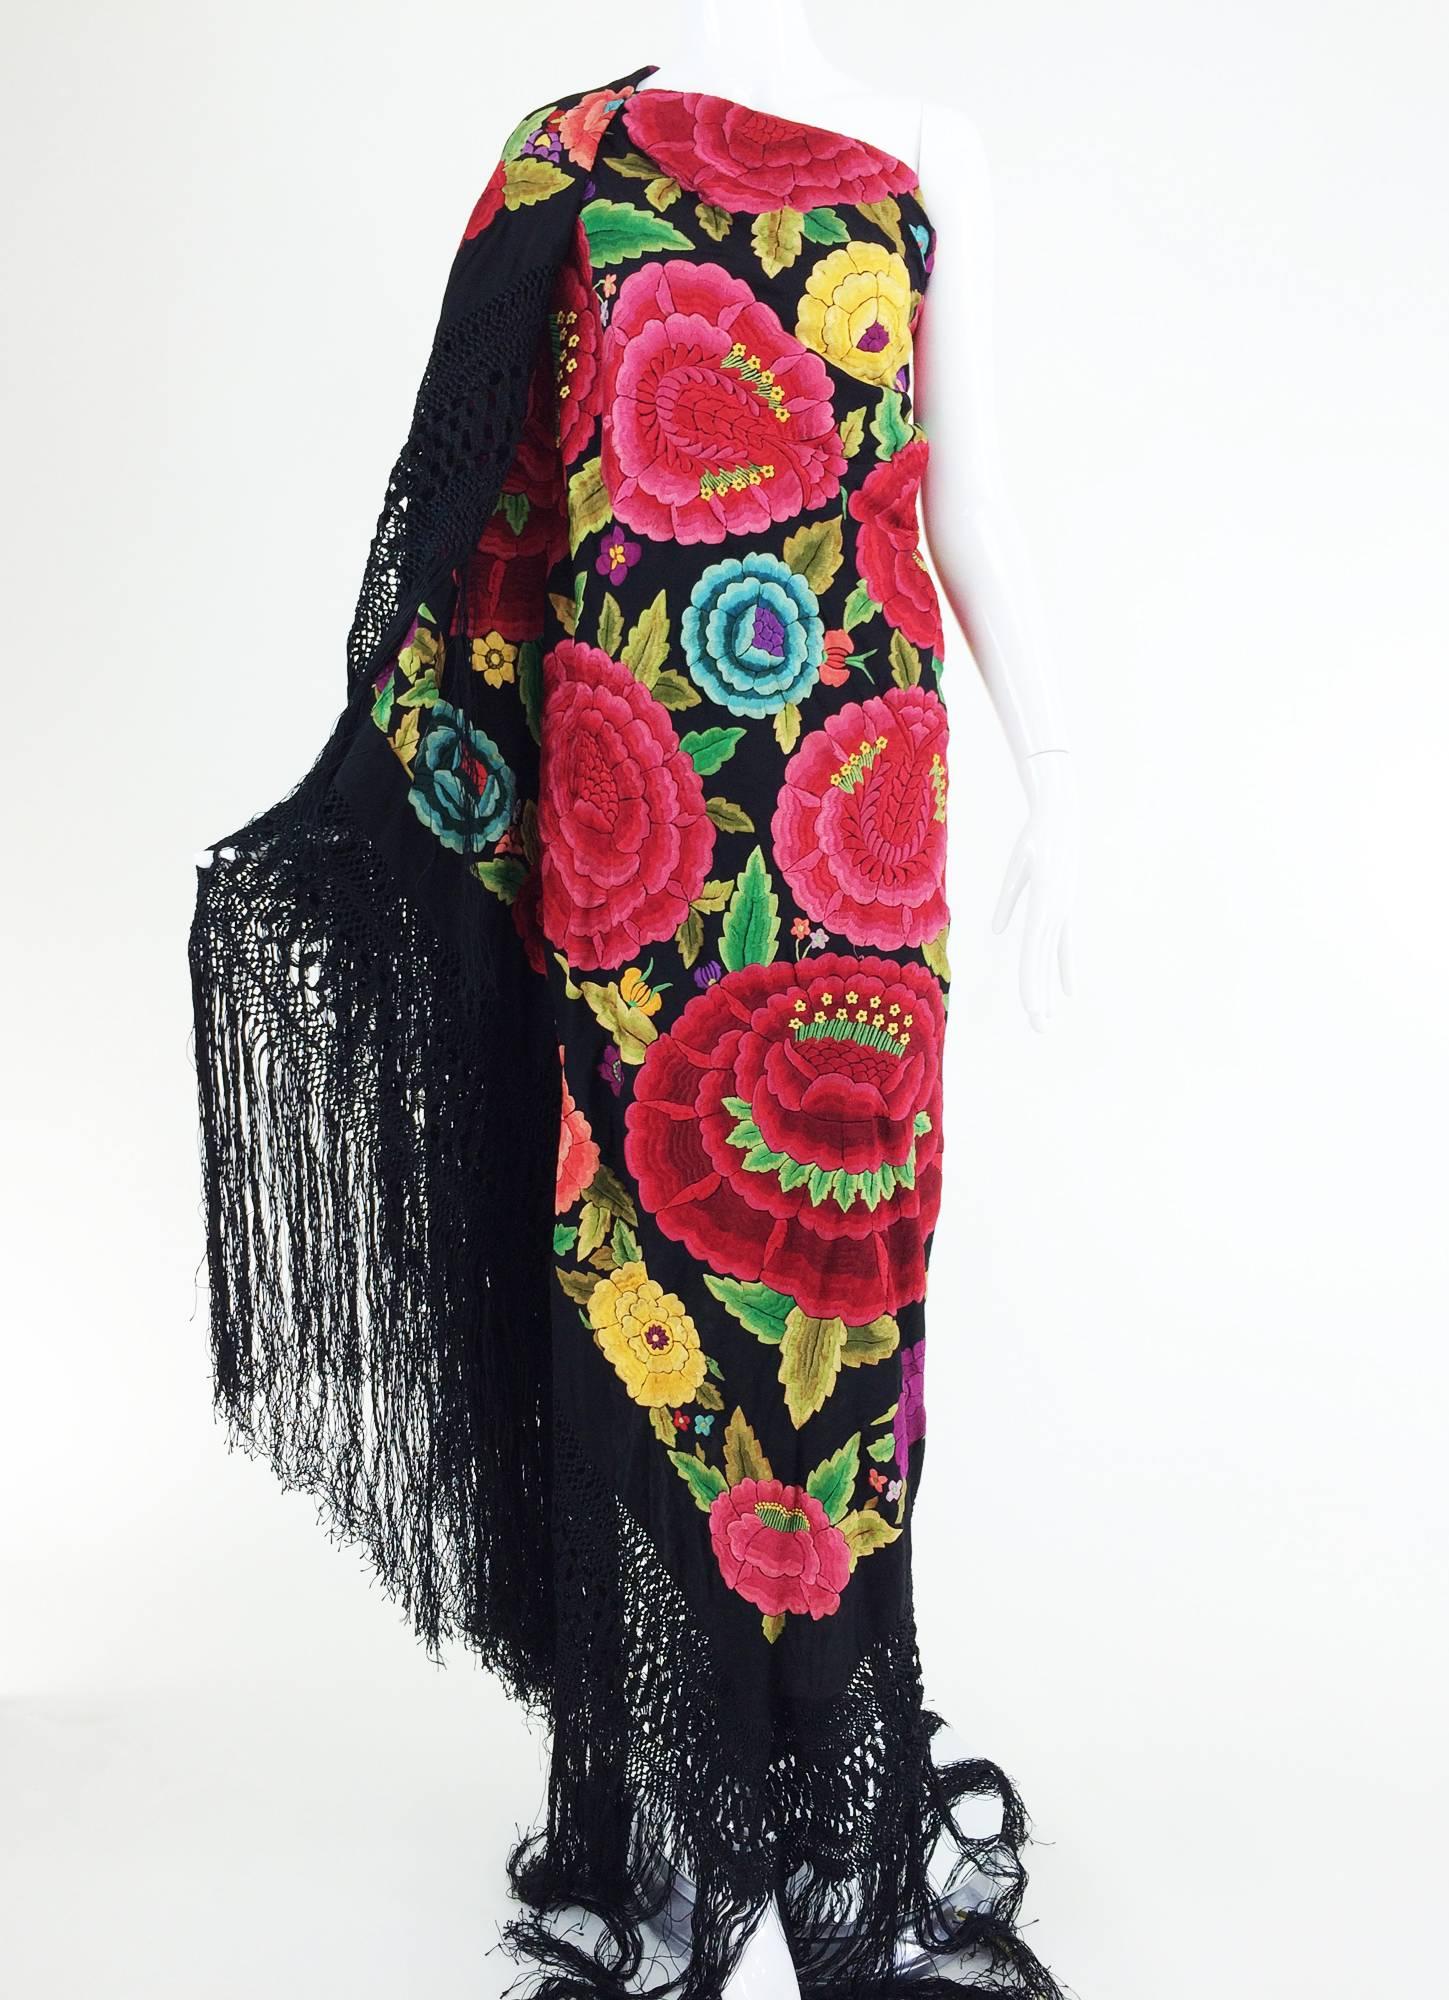  Hand embroidered Spanish manton shawl from the 1920s...Heavily embroidered black silk with very large roses in vibrant pinks with smaller flowers in various colours...Shawls of this size with such dense embroidery are rare to find anymore, this